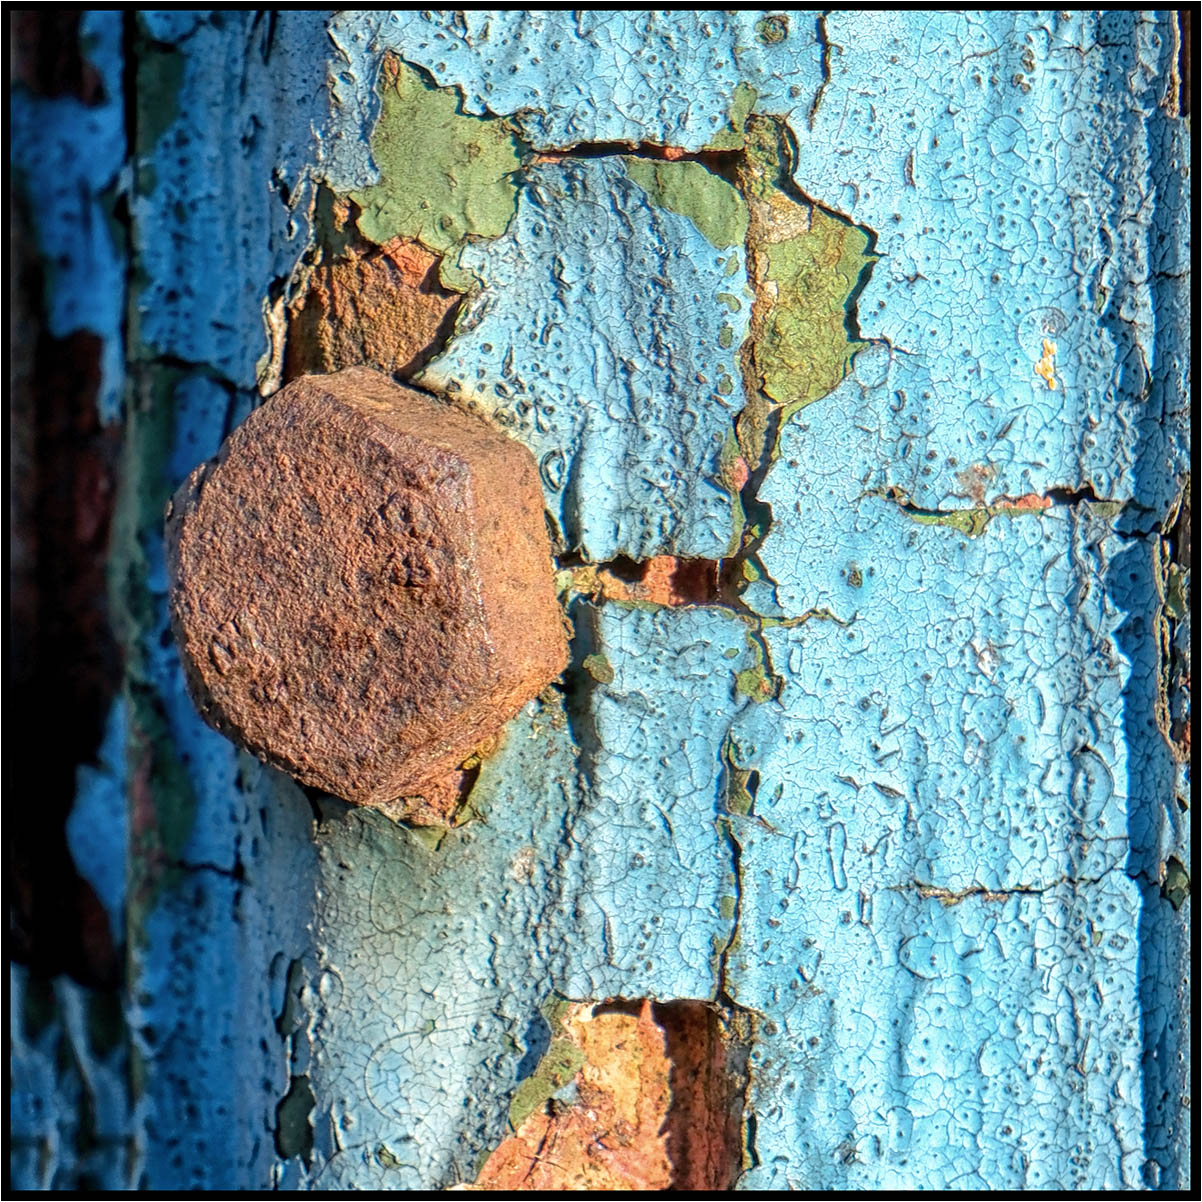 A rusty bolt out of the blue, Sue Hoggett